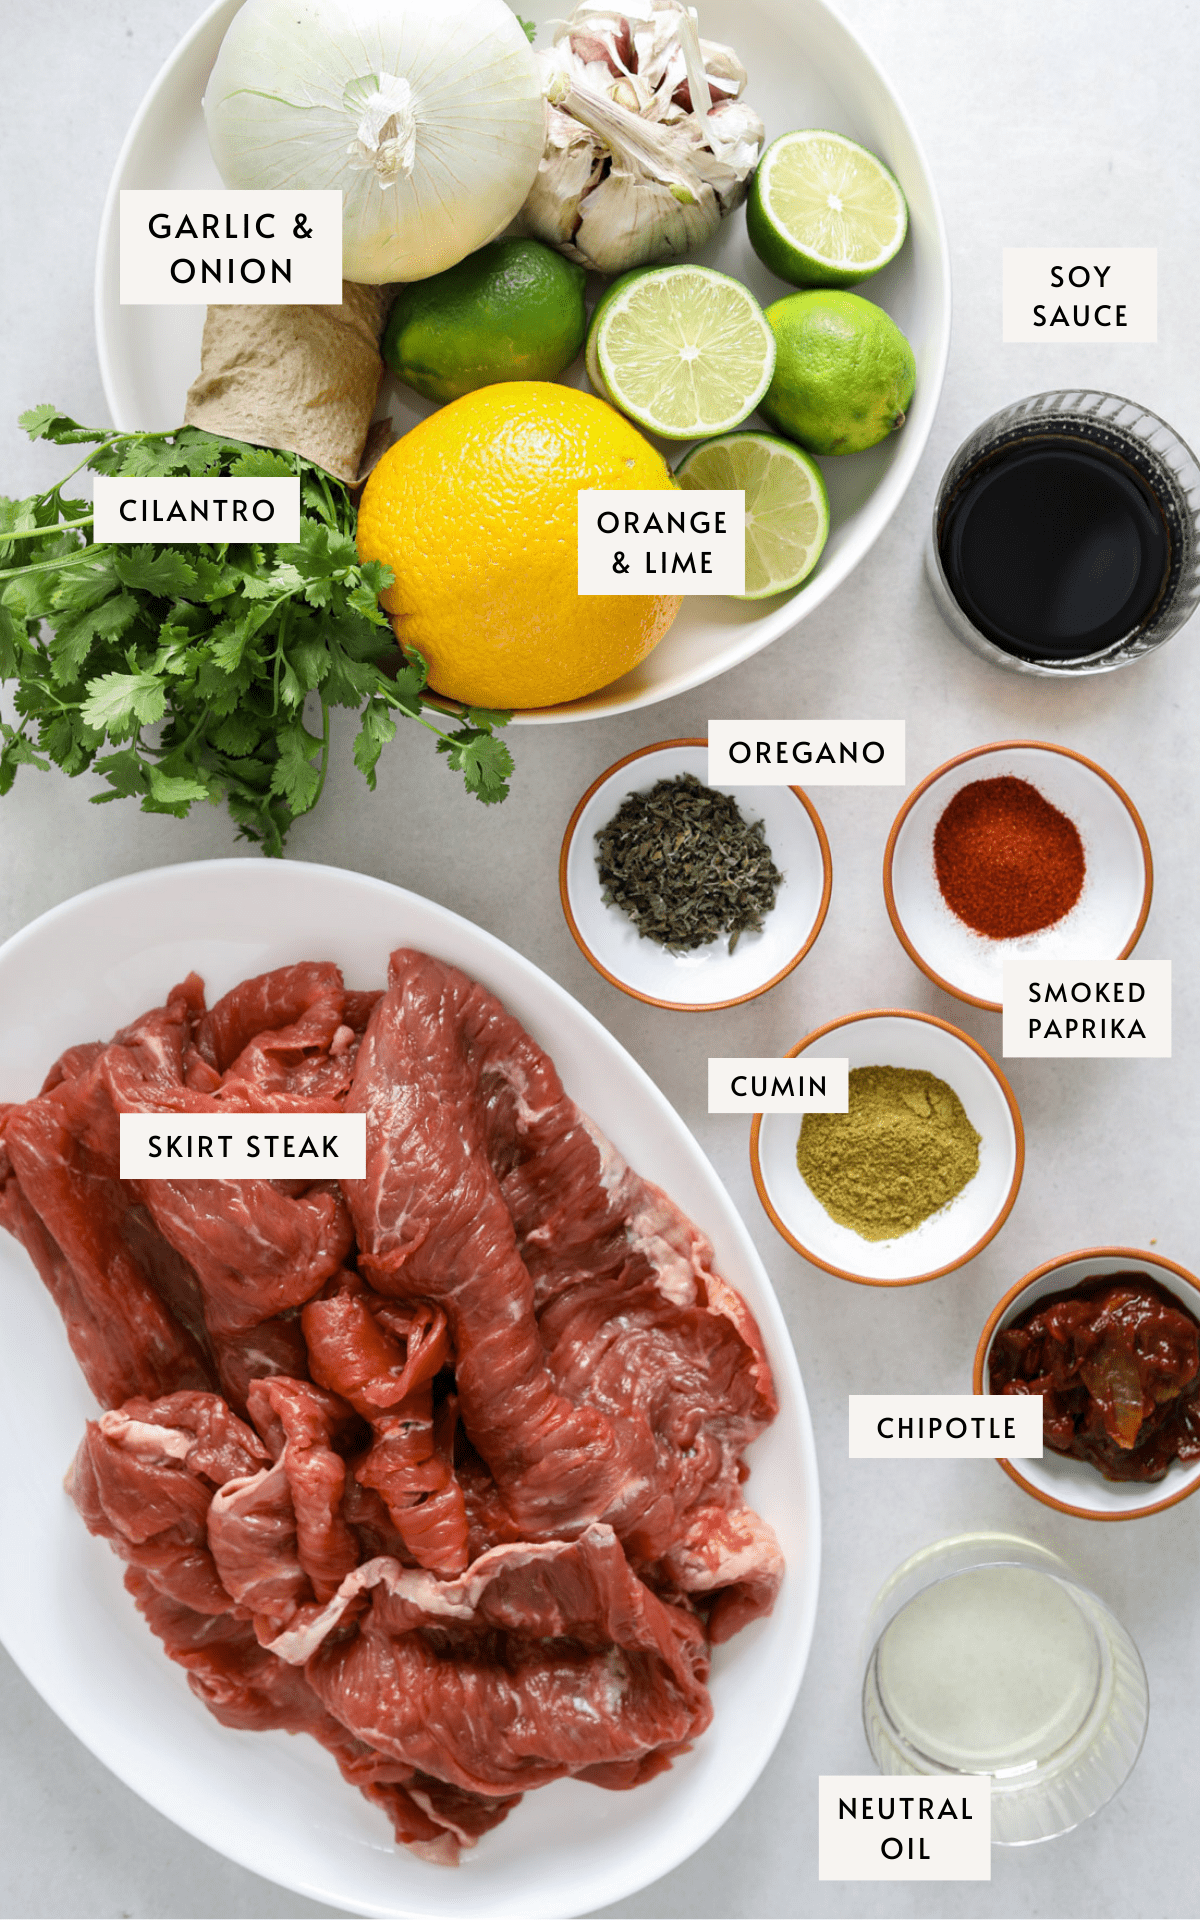 a white oval platter with raw skirt steak, small bowls filled with spices, a large bowl with oranges, limes, garlic bulbs, onion and cilantro, chipotle peppers in adobo sauce and a small glass bowl of neutral oil.